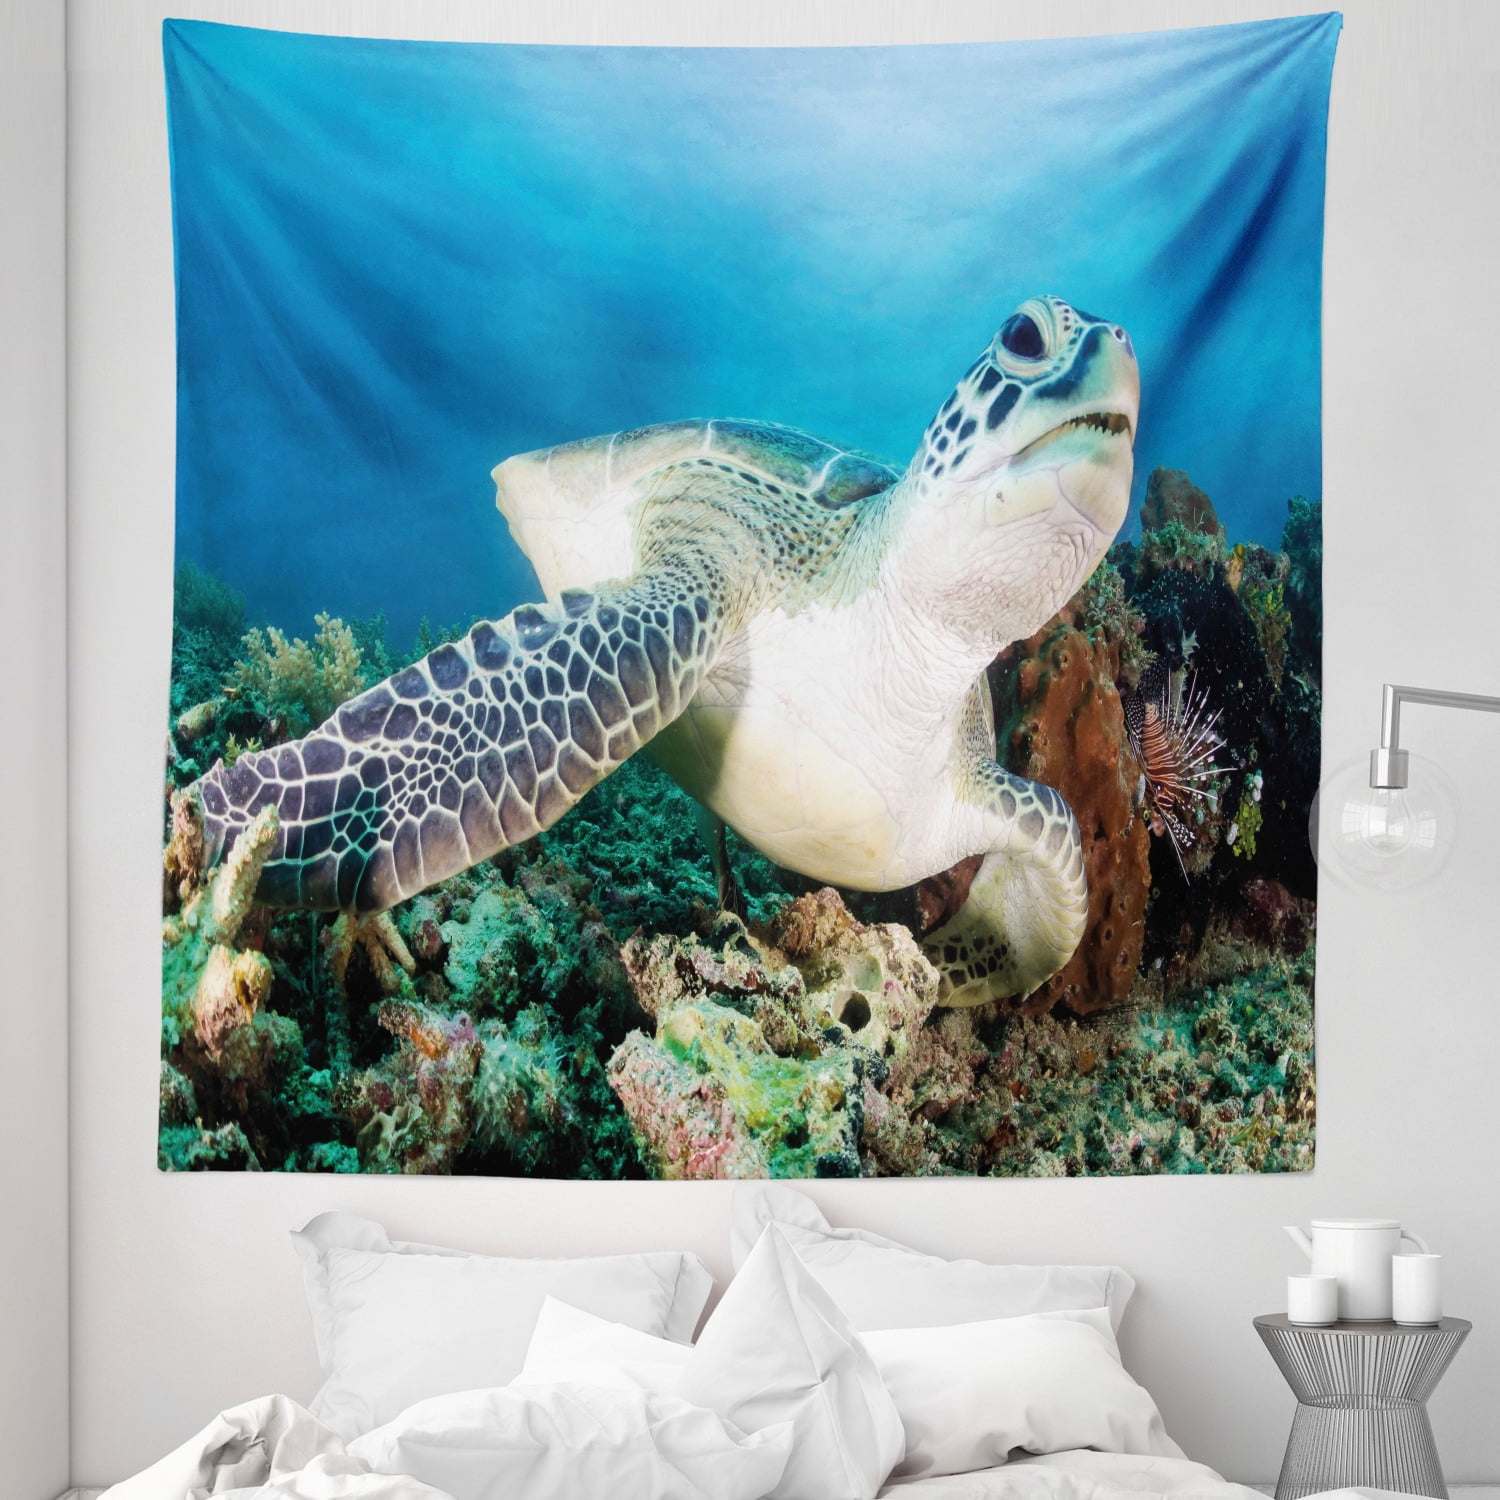 Underwater World Tropical Fish Sea Turtle Tapestry Wall Hanging for Bedroom Dorm